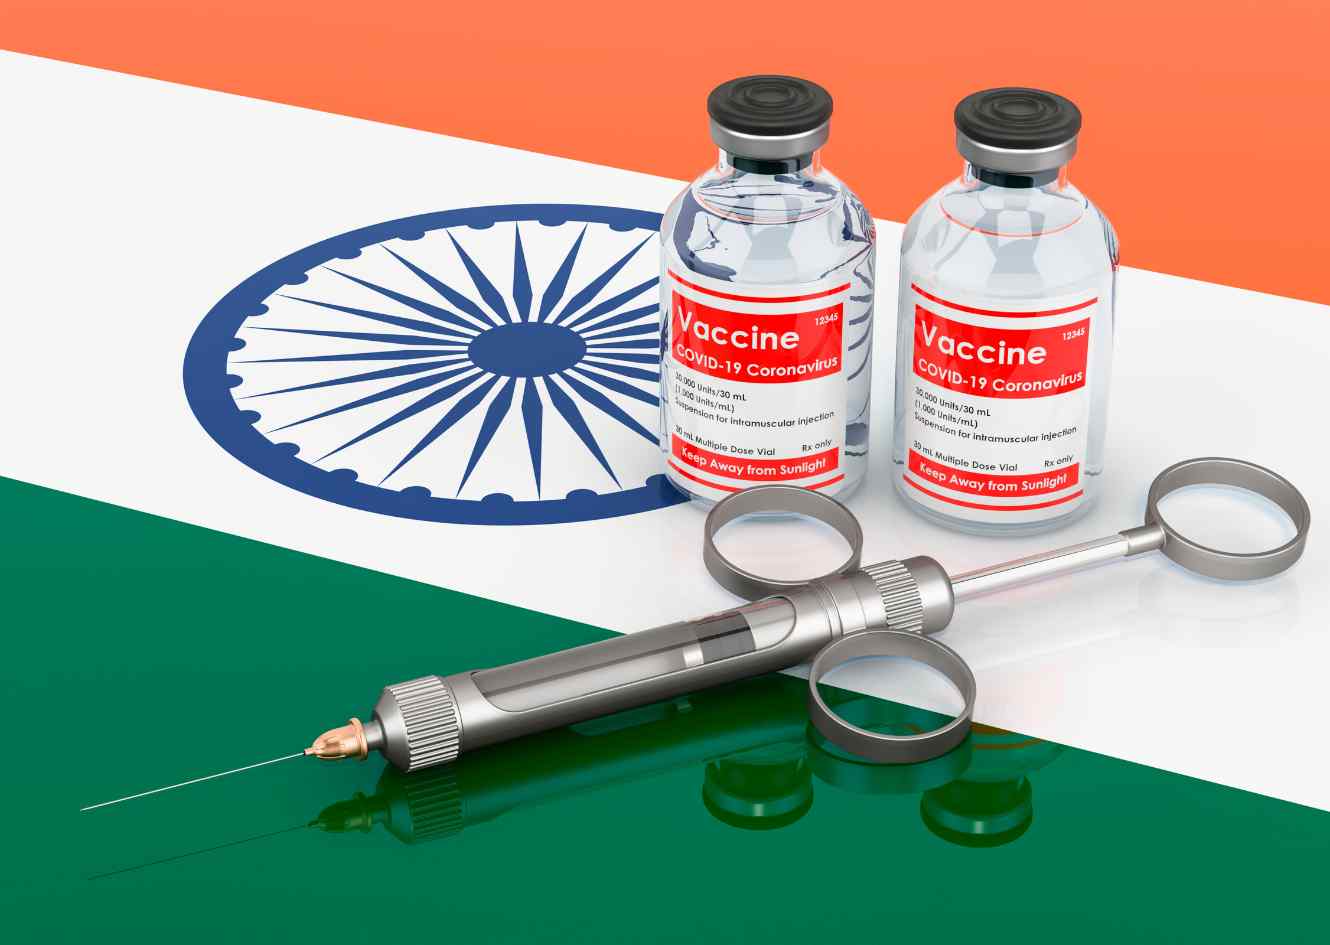 Vaccination during Covid-19 in India